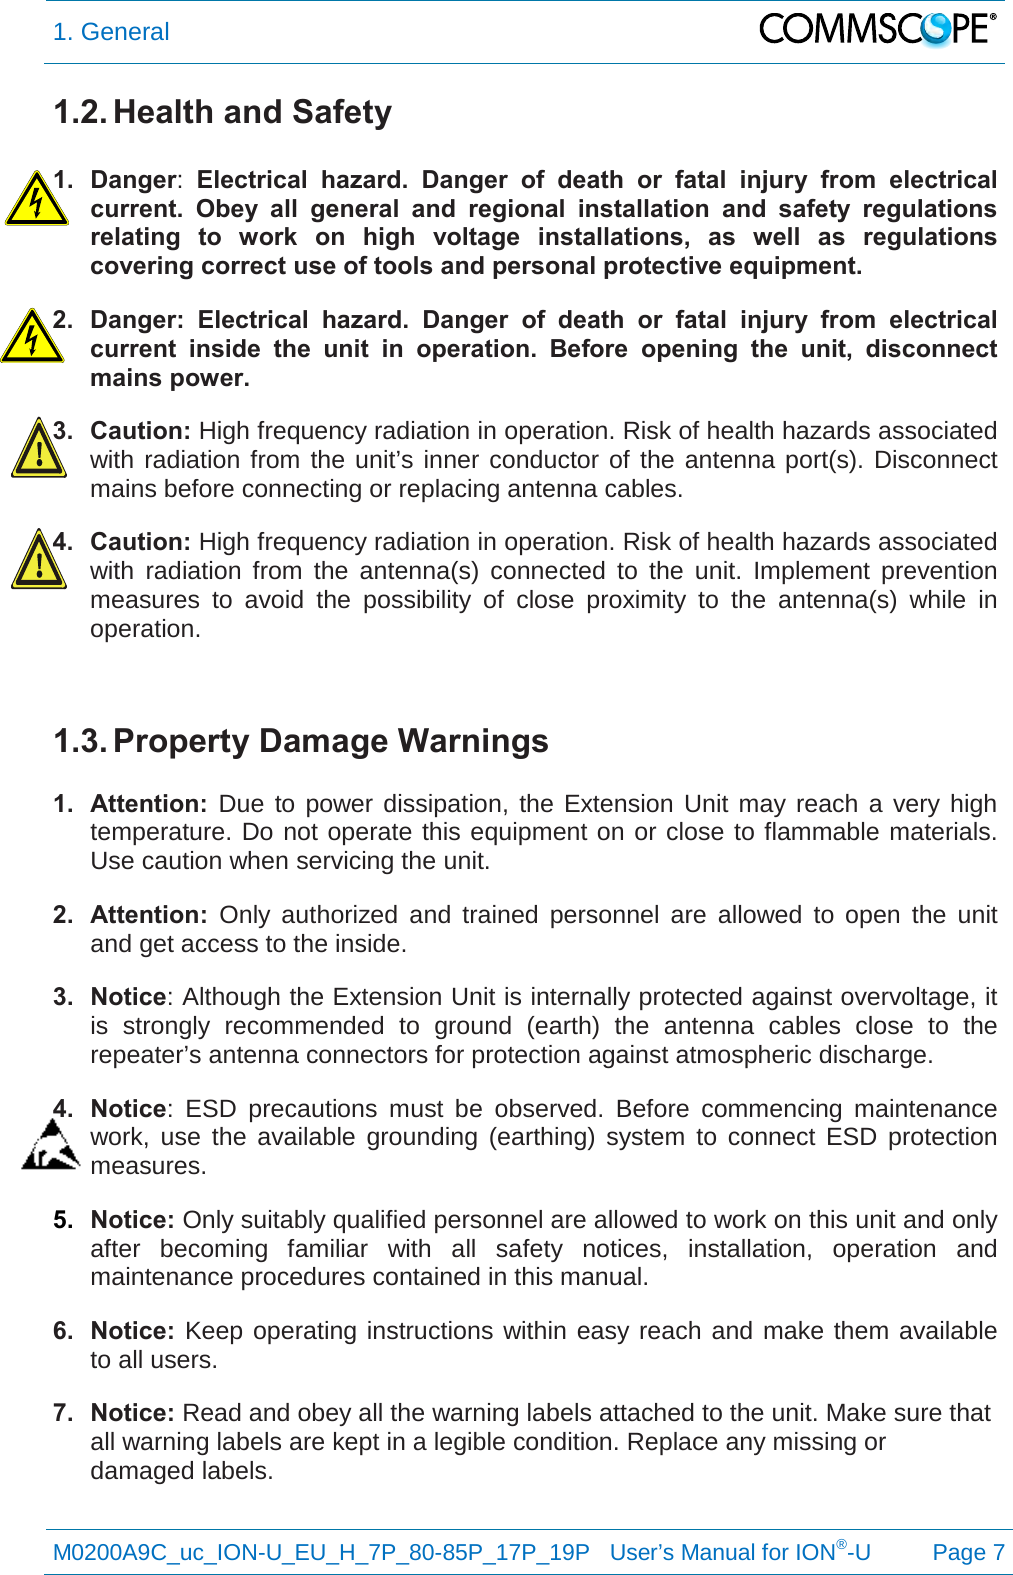 1. General   M0200A9C_uc_ION-U_EU_H_7P_80-85P_17P_19P   User’s Manual for ION®-U  Page 7  1.2. Health and Safety  1. Danger:  Electrical hazard. Danger of death or fatal injury from electrical current. Obey all general and regional installation and safety regulations relating to work on high voltage installations, as well as regulations covering correct use of tools and personal protective equipment. 2. Danger:  Electrical hazard. Danger of death or fatal injury from electrical current inside the unit in operation.  Before opening the unit, disconnect mains power. 3. Caution: High frequency radiation in operation. Risk of health hazards associated with radiation from the unit’s inner conductor of the antenna port(s). Disconnect mains before connecting or replacing antenna cables. 4. Caution: High frequency radiation in operation. Risk of health hazards associated with radiation from the antenna(s) connected to the unit. Implement prevention measures to avoid the possibility of close proximity to the antenna(s) while in operation.  1.3. Property Damage Warnings  1. Attention:  Due to power dissipation, the Extension Unit may reach a very high temperature. Do not operate this equipment on or close to flammable materials. Use caution when servicing the unit. 2. Attention: Only authorized and trained personnel are allowed to open the unit and get access to the inside. 3. Notice: Although the Extension Unit is internally protected against overvoltage, it is strongly recommended to ground (earth) the antenna cables close to the repeater’s antenna connectors for protection against atmospheric discharge. 4. Notice:  ESD precautions must be observed. Before commencing maintenance work, use the available grounding (earthing) system to connect ESD protection measures. 5. Notice: Only suitably qualified personnel are allowed to work on this unit and only after becoming familiar with all safety notices, installation, operation and maintenance procedures contained in this manual. 6. Notice: Keep operating instructions within easy reach and make them available to all users. 7. Notice: Read and obey all the warning labels attached to the unit. Make sure that all warning labels are kept in a legible condition. Replace any missing or damaged labels.   